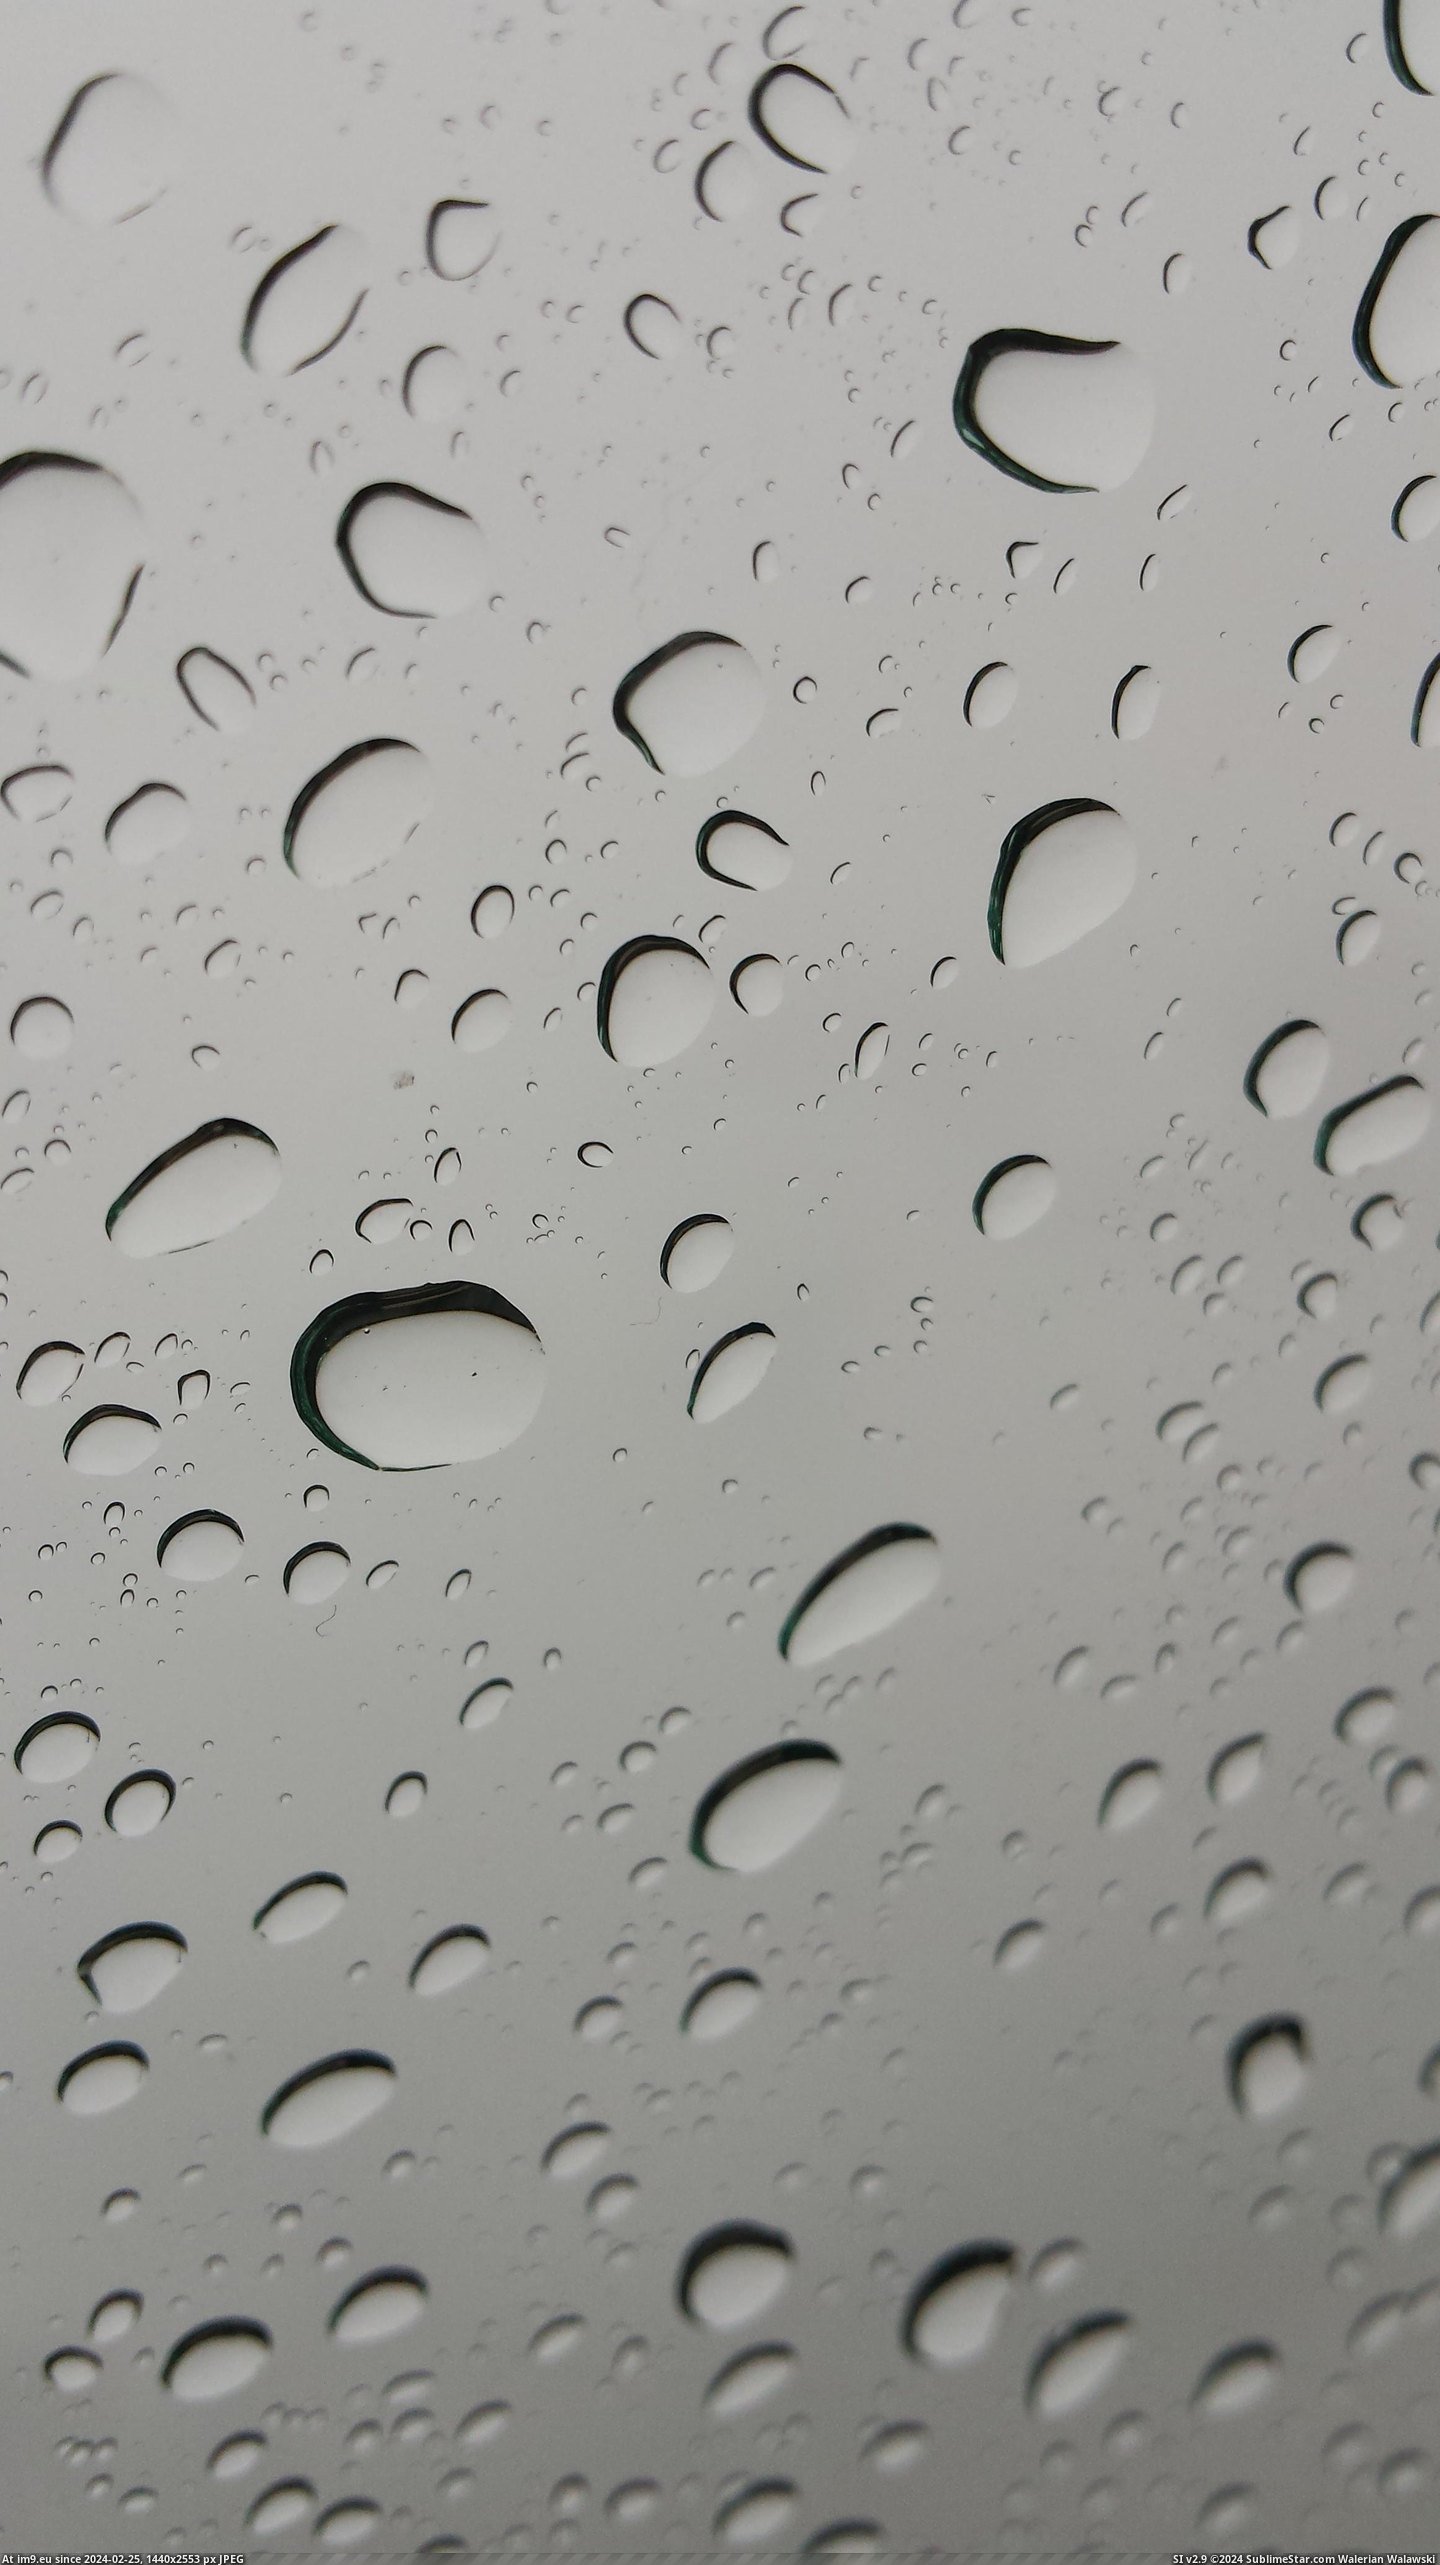 #Wallpaper #Picture #Default #Phone #Windshield [Mildlyinteresting] Took a picture of my windshield, looks like a default phone wallpaper Pic. (Image of album My r/MILDLYINTERESTING favs))